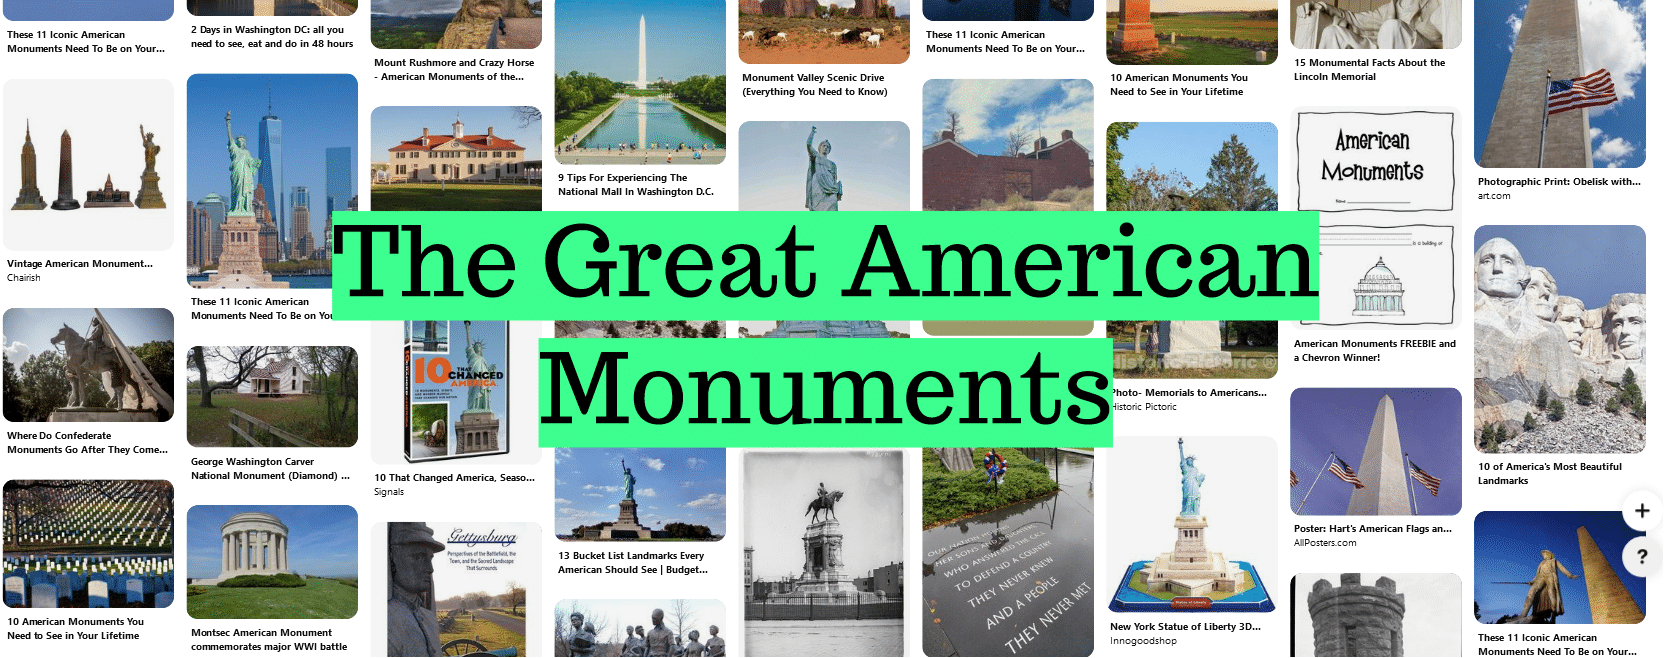 The Great American Monuments